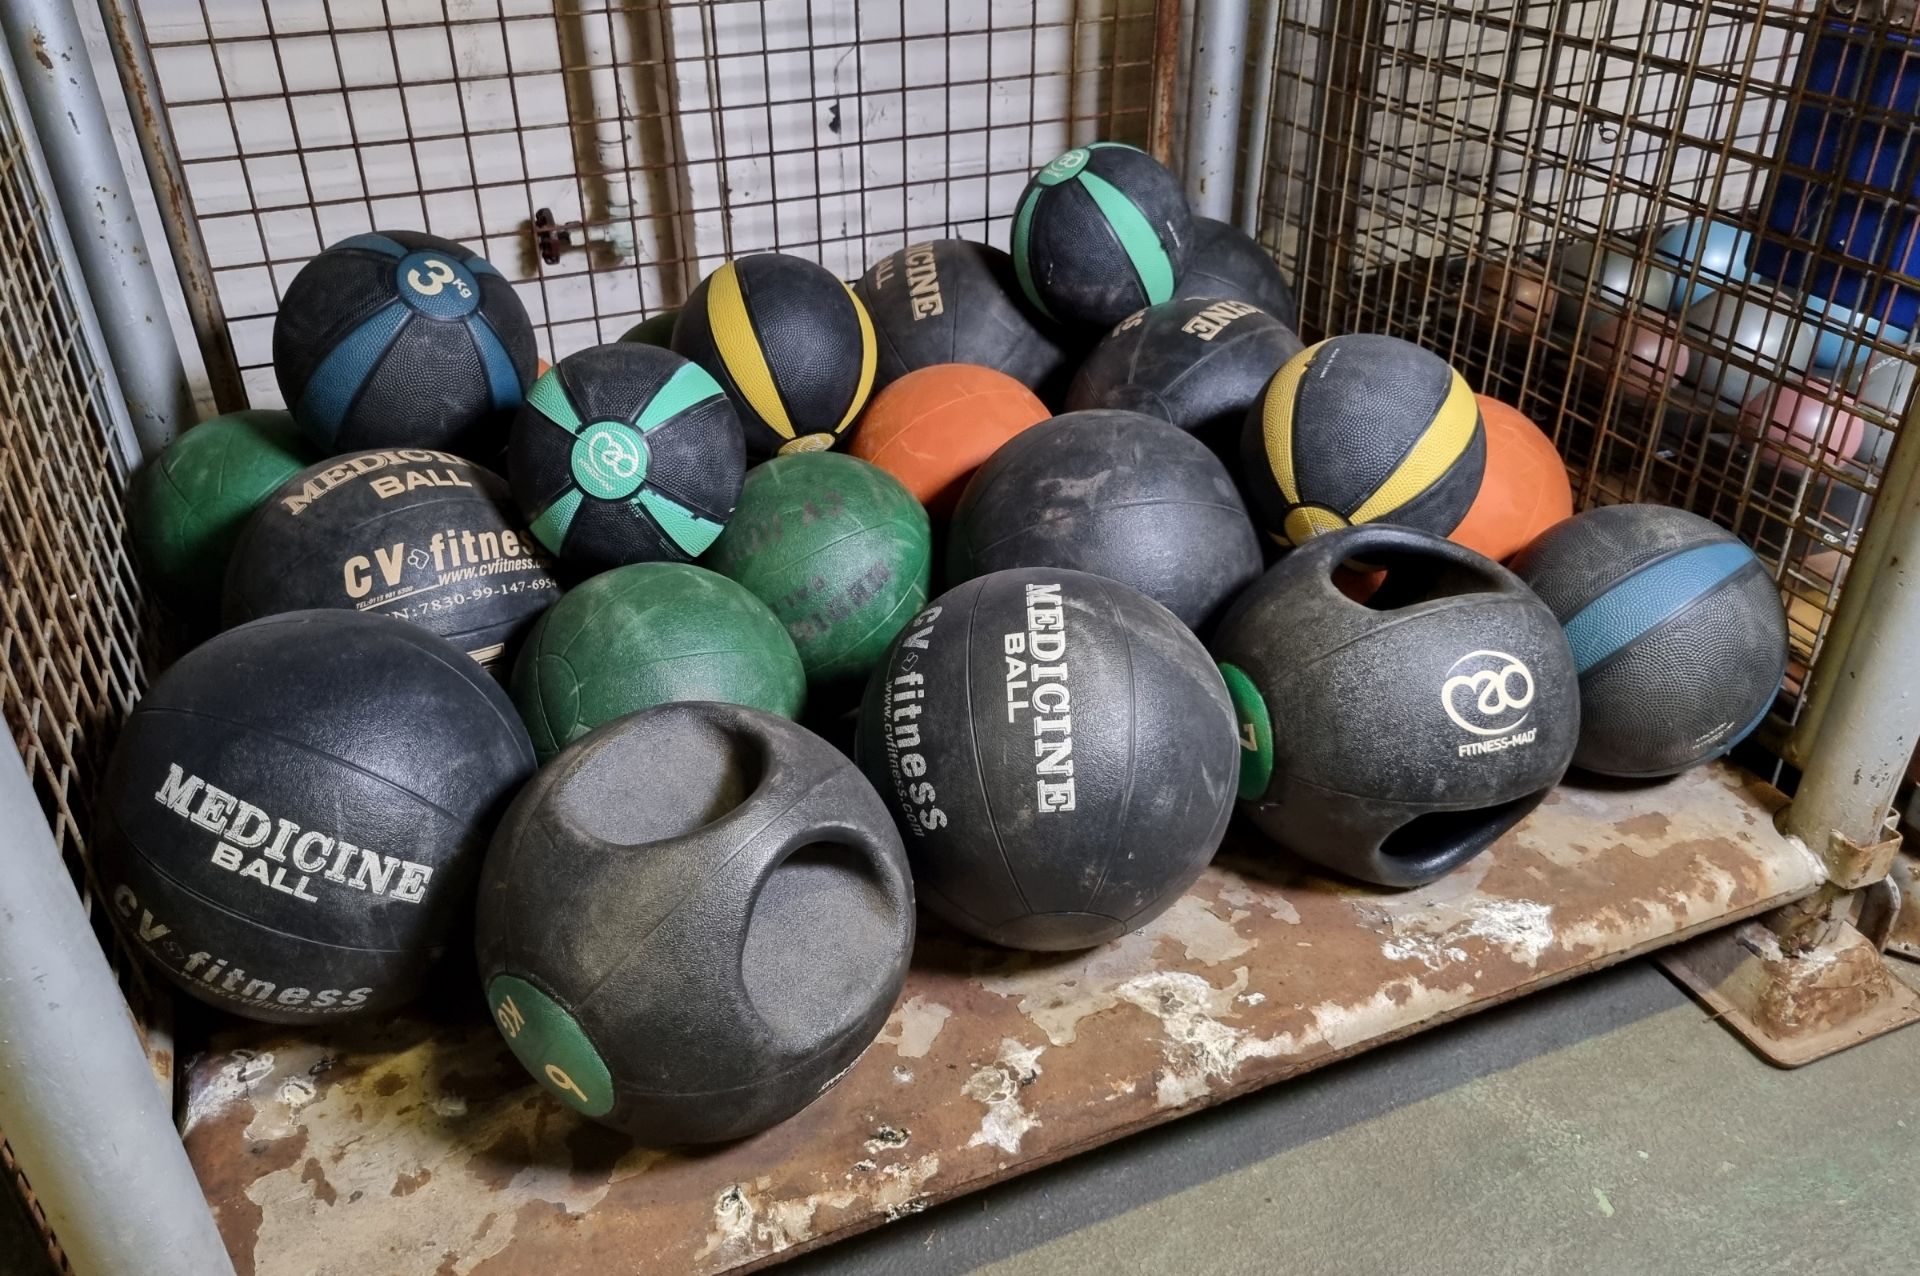 23x Medicine balls multiple sizes and weights - Image 3 of 3